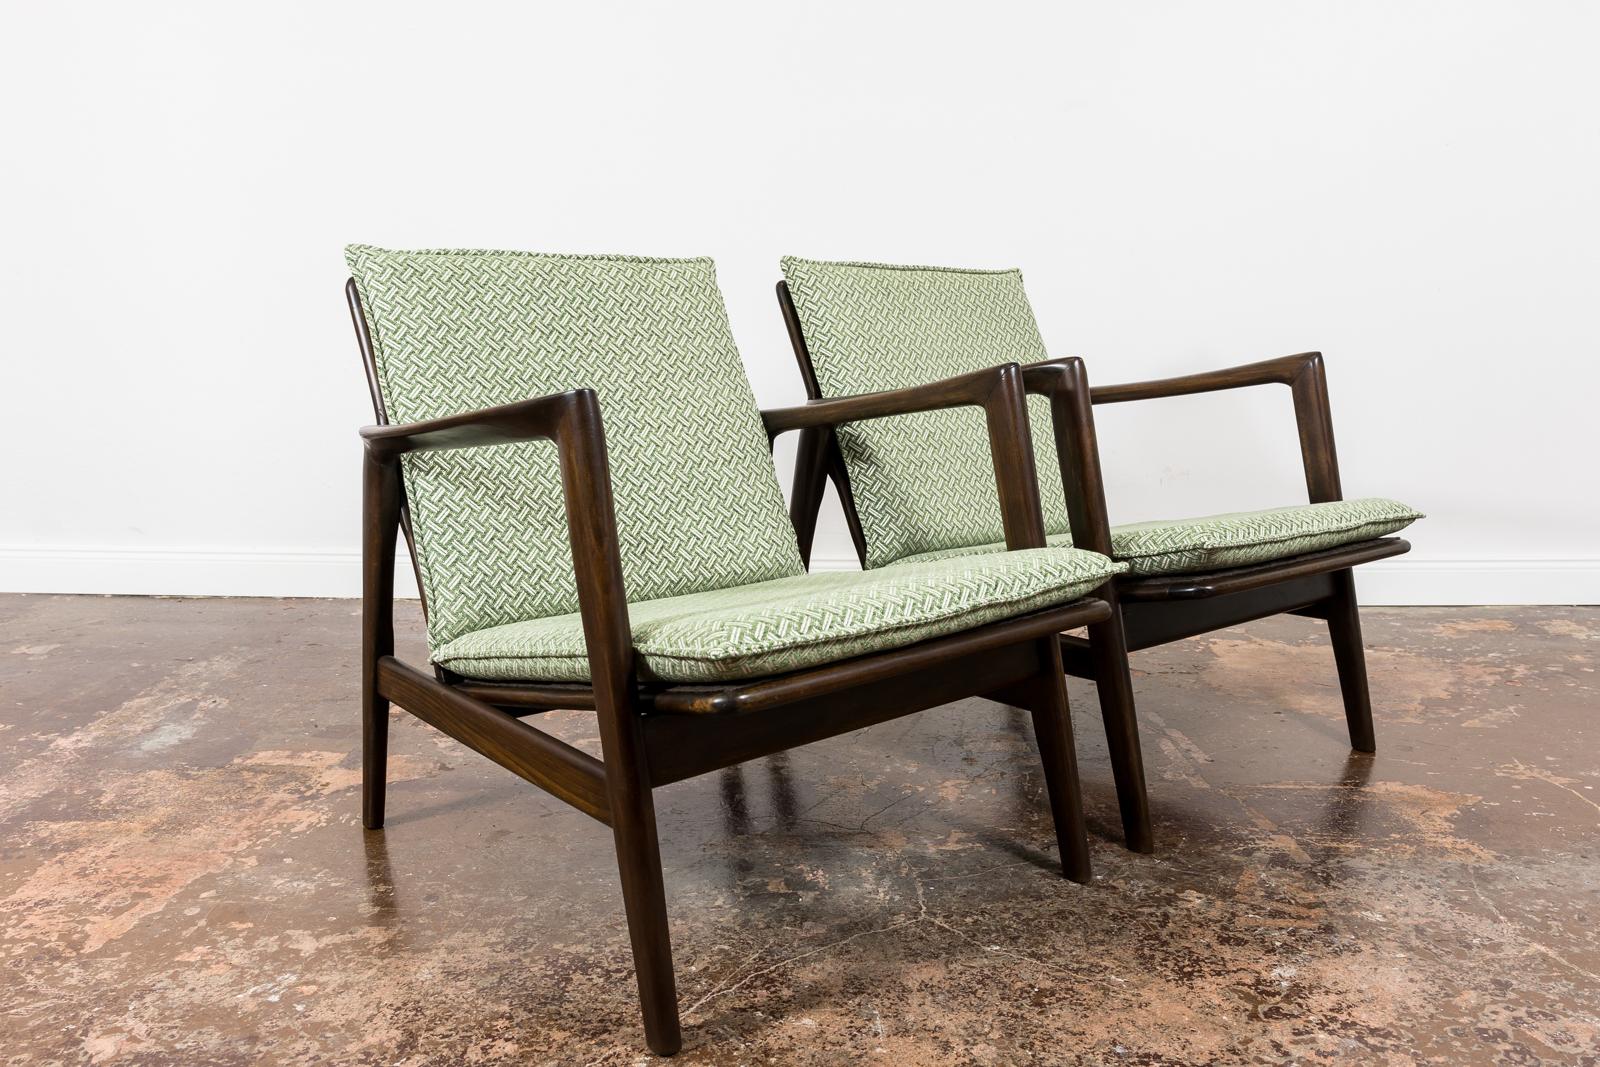 Pair of Mid Century Modern Armchairs Type 300-130, 1960s, Poland For Sale 2